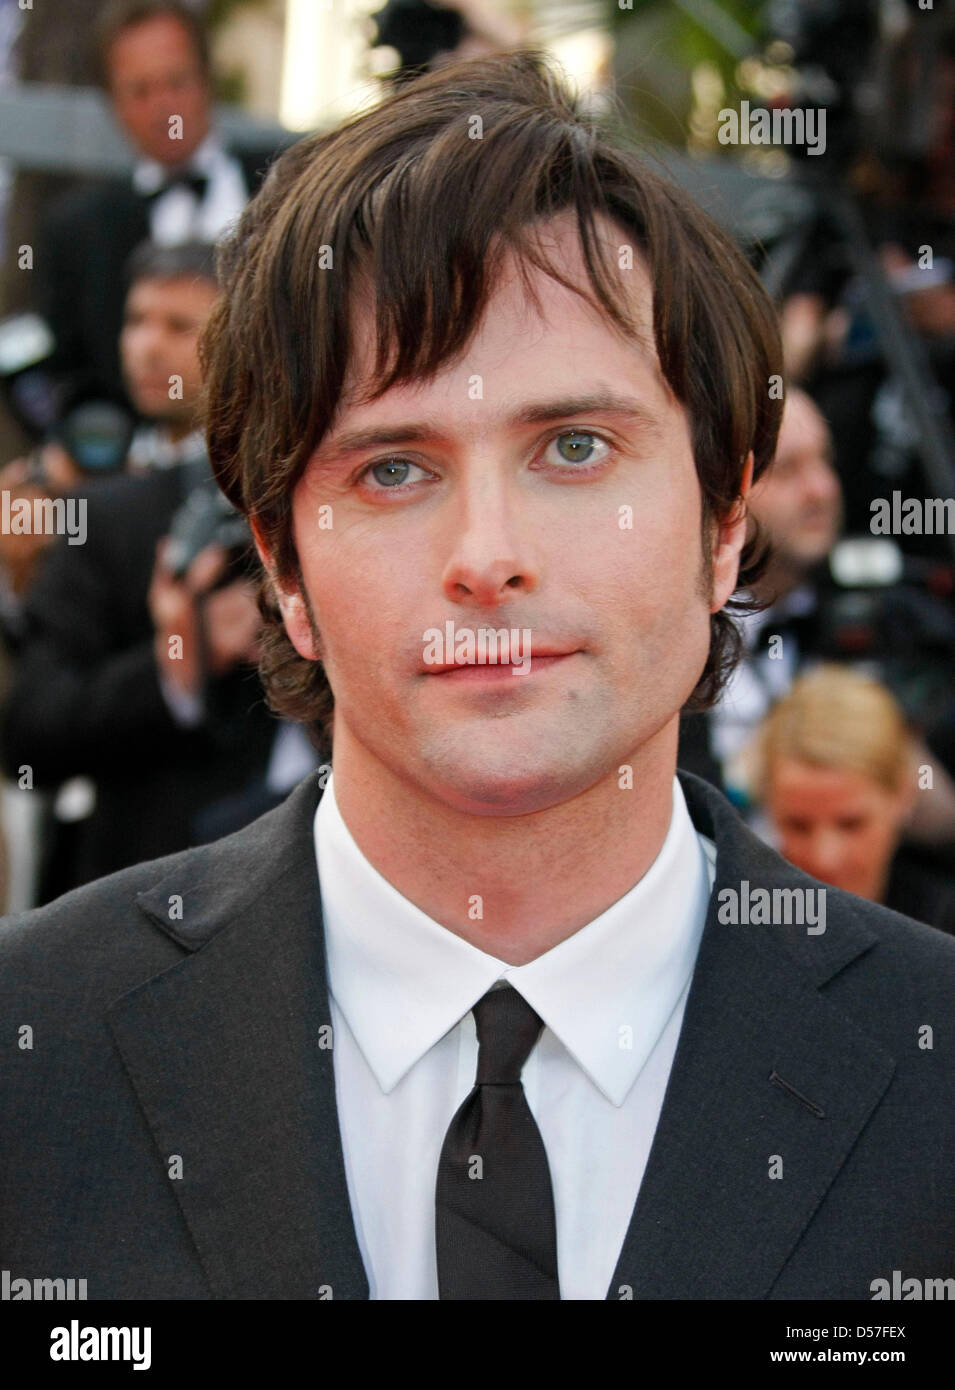 English actor Edward Hogg attends the premiere of the movie 'Tournee' at the 63rd Cannes Film Festival at the Palais des Festivals in Cannes, France, 13 May 2010. The Cannes Film Festival 2010 runs from 12 to 23 May 2010. Photo: Hubert Boesl Stock Photo